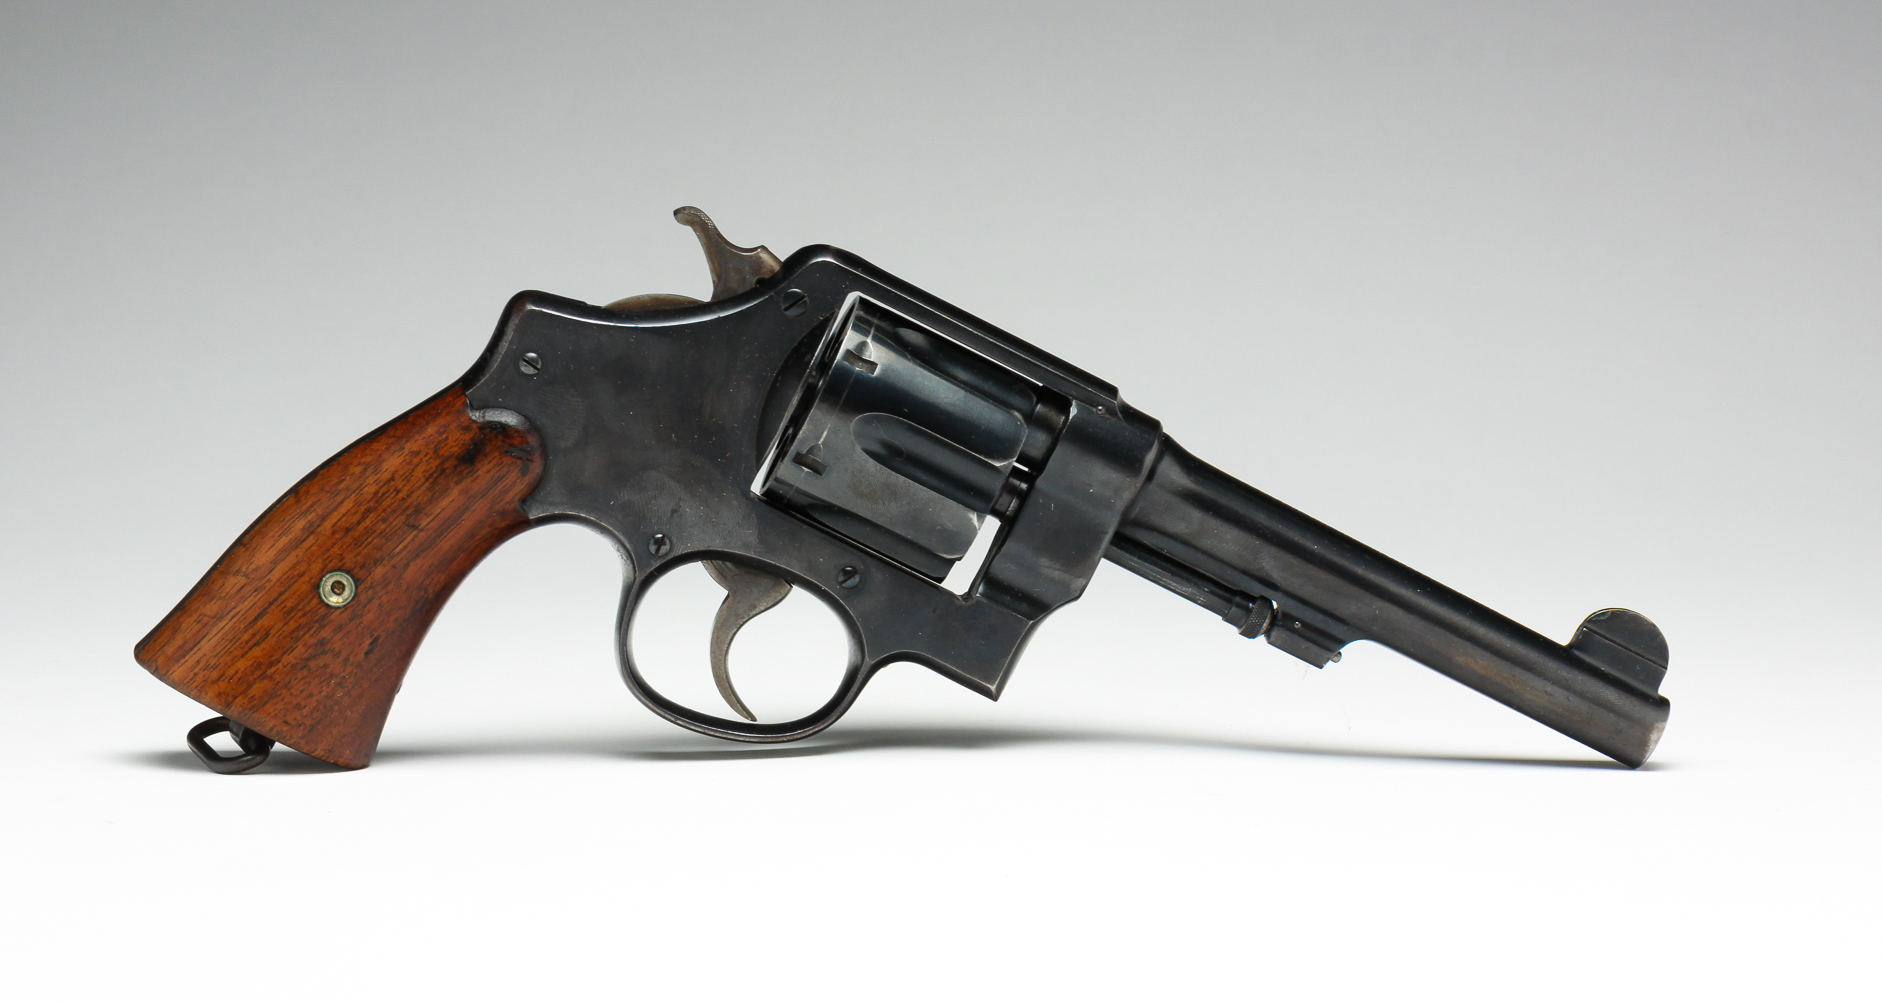 SMITH WESSON US ARMY MODEL 1917 31a72a